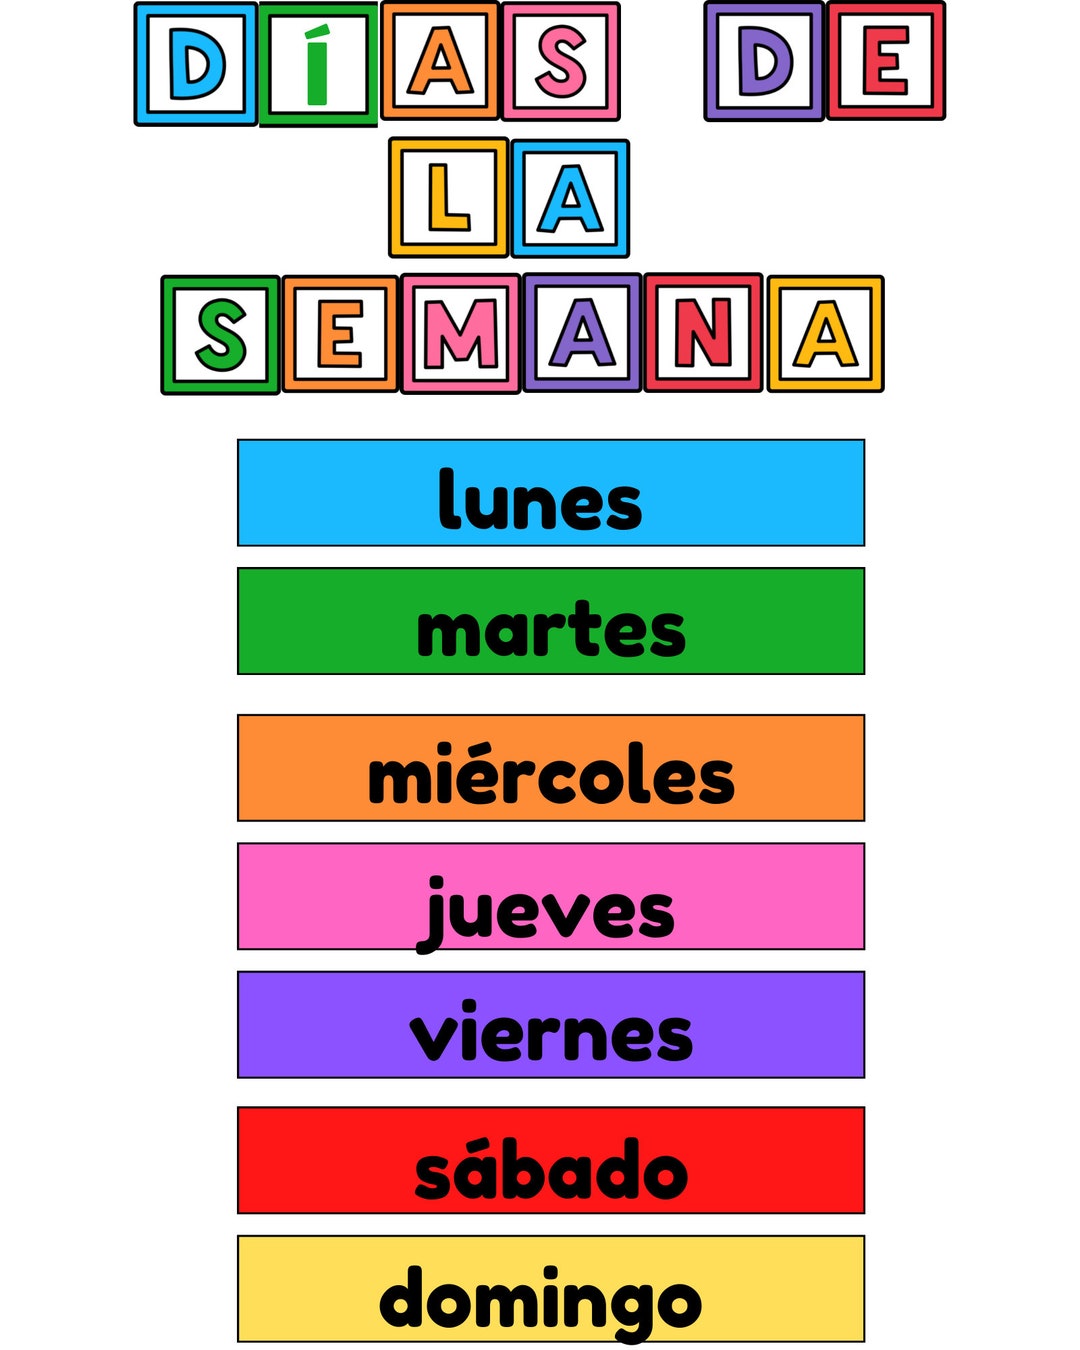 An ultimate guide to learning days of the week in Spanish - Learn